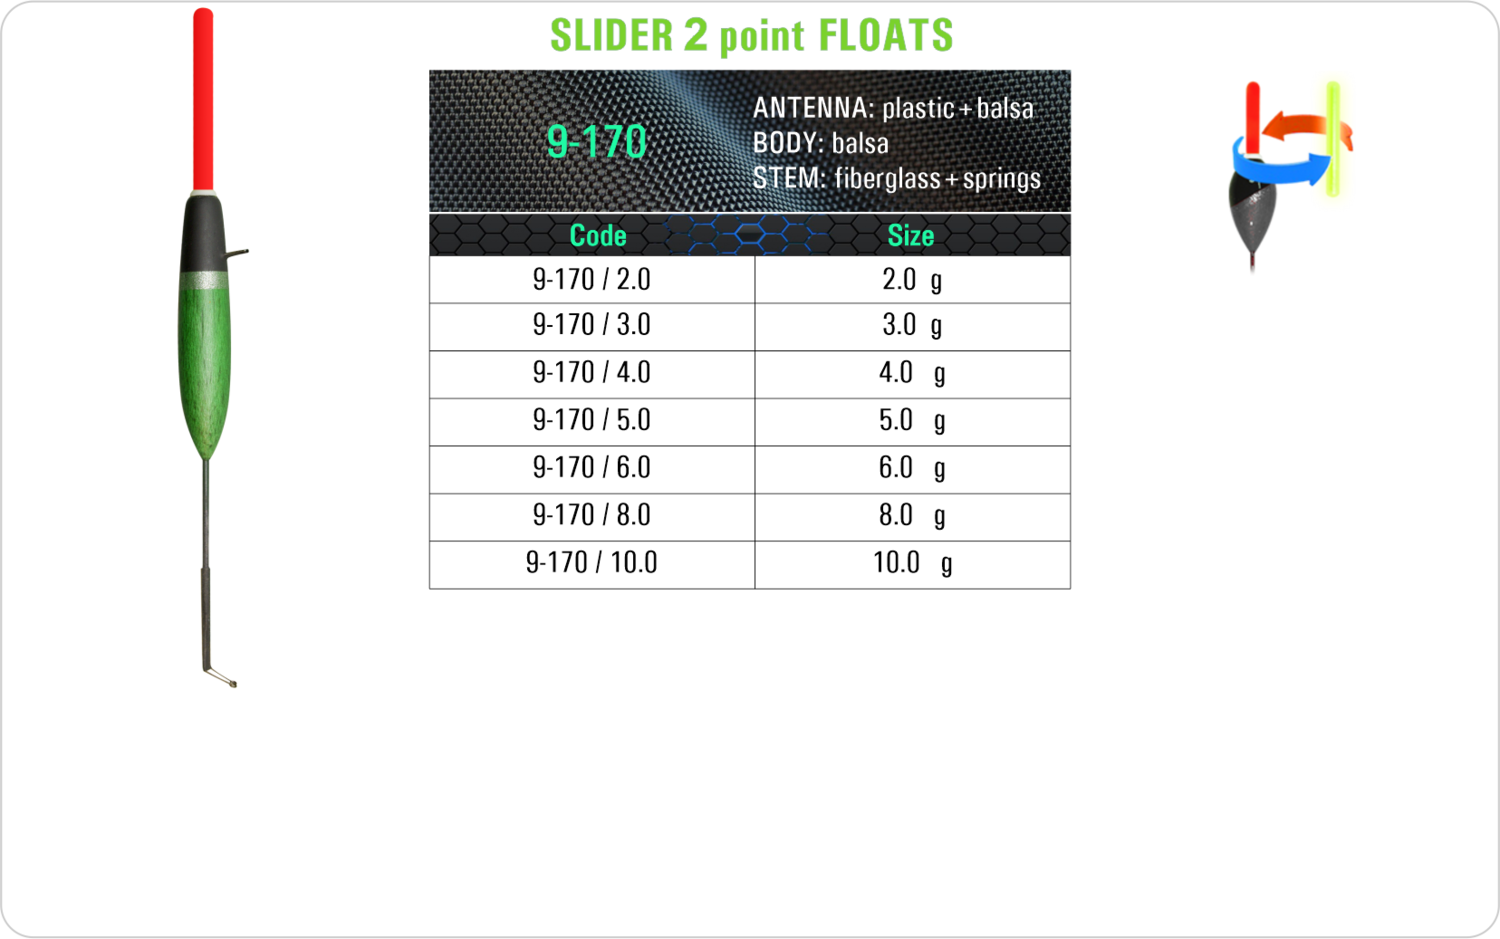 SF 9-170 - Lake and river float model and table containing an additional information about this float with different codes, sizes, types of the body, the stem and the antenna of the float.